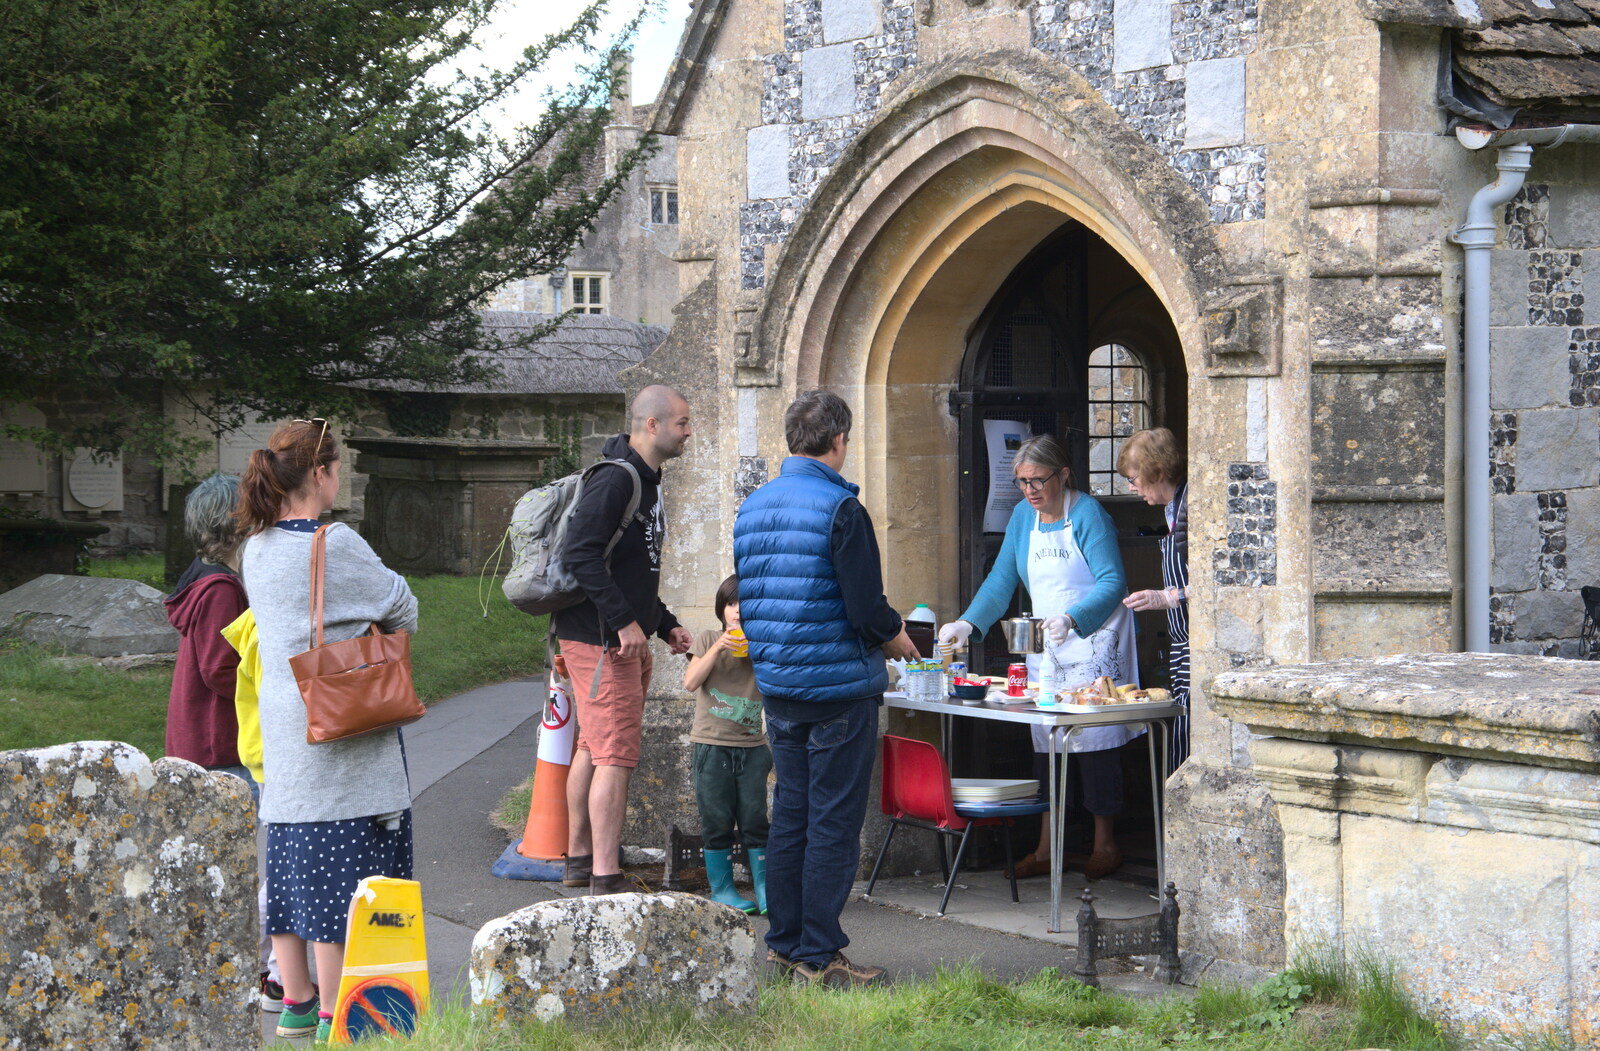 We find a WI cake sale from Stone Circles: Stonehenge and Avebury, Wiltshire - 22nd August 2020